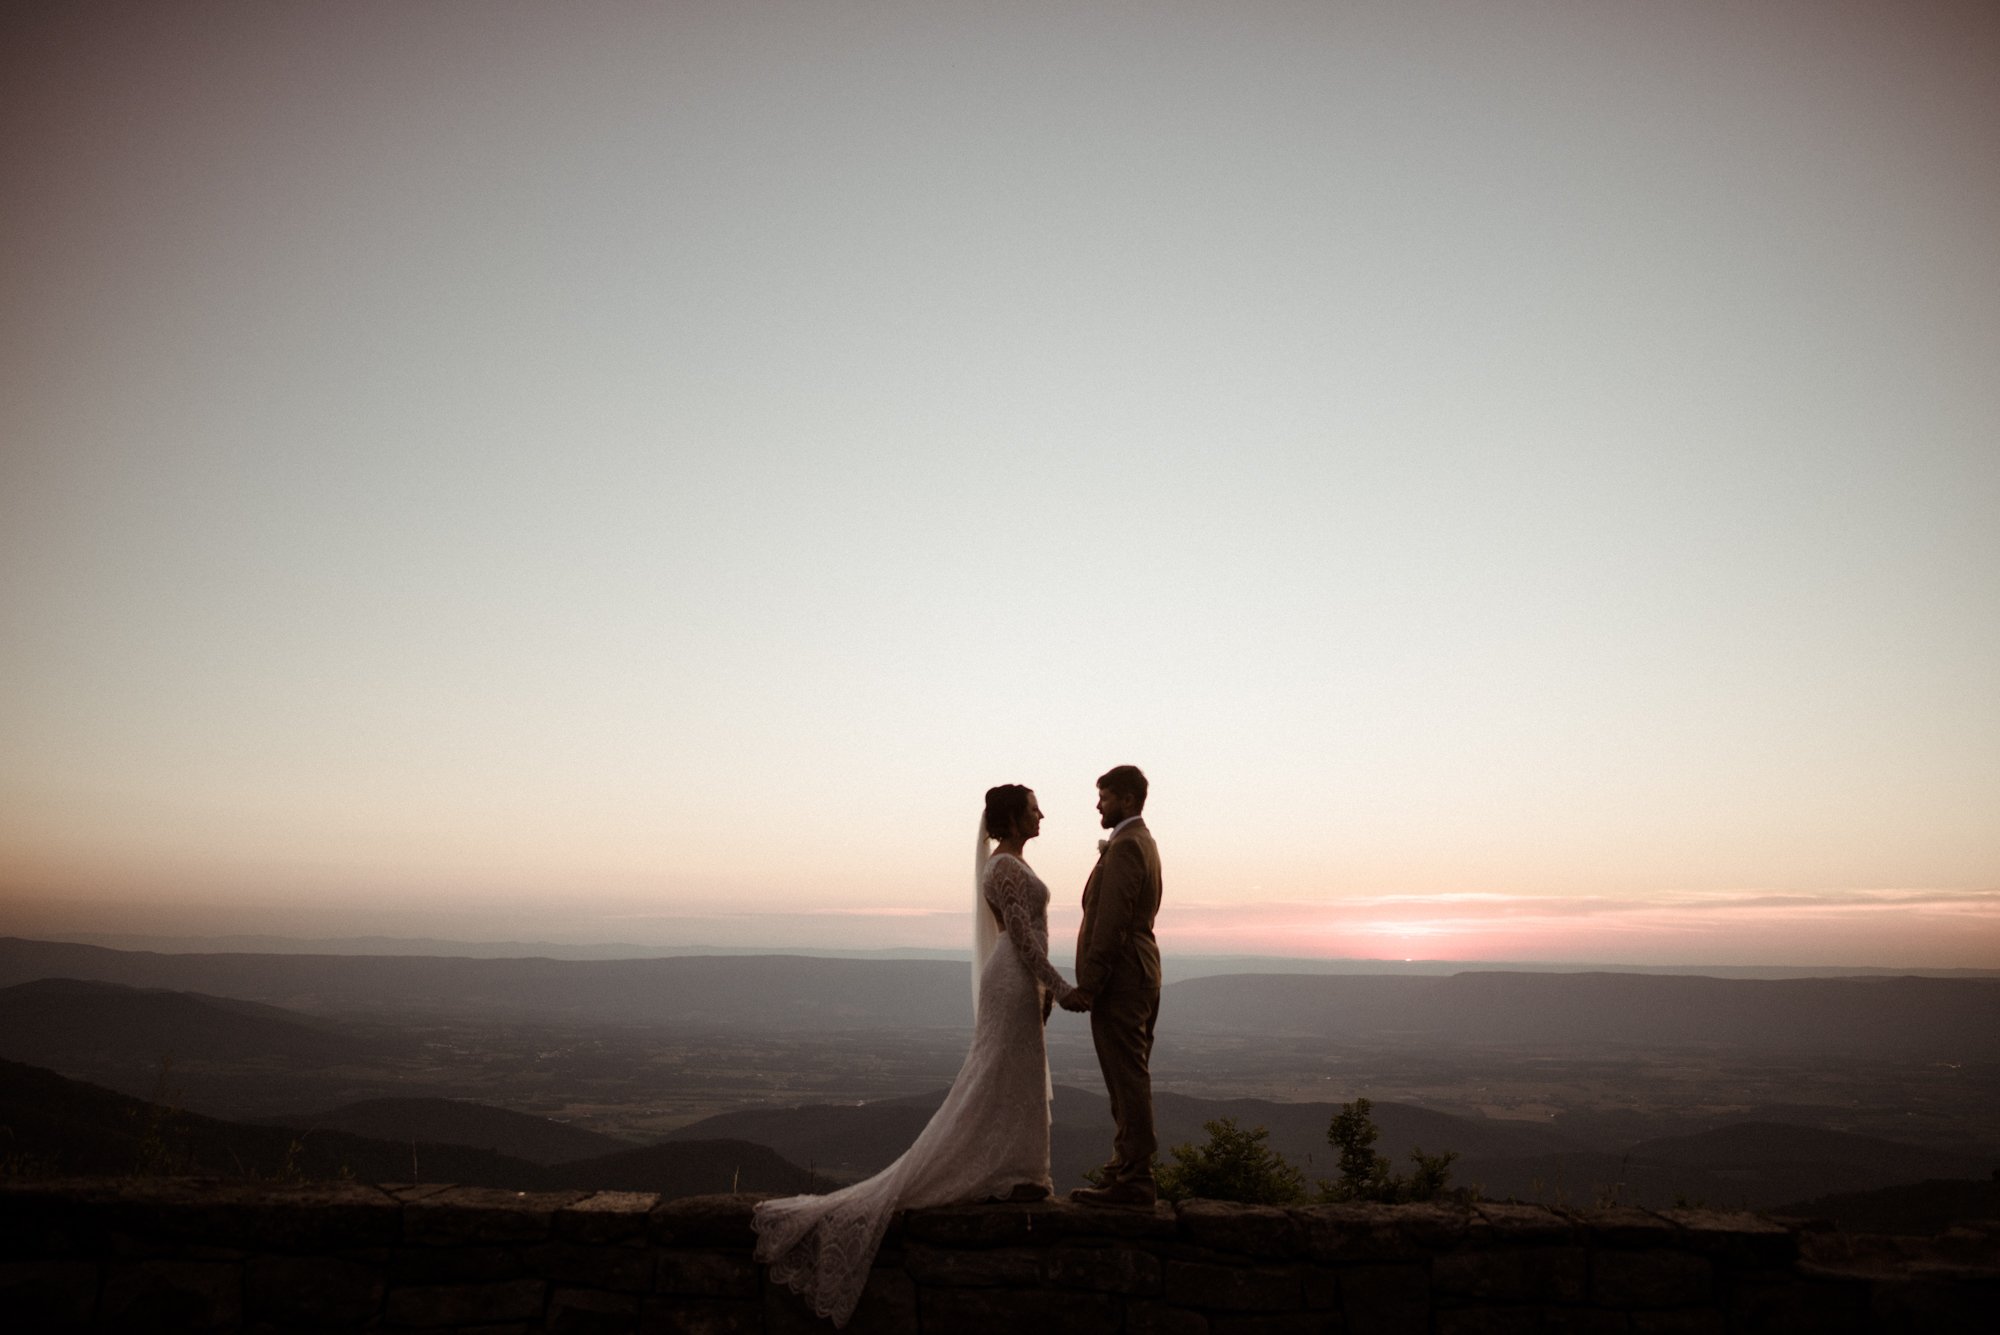 Sunset Elopement on Stony Man Summit in Shenandoah National Park - White Sails Creative Elopement Photography - July Elopement on the Blue Ridge Parkway_73.jpg